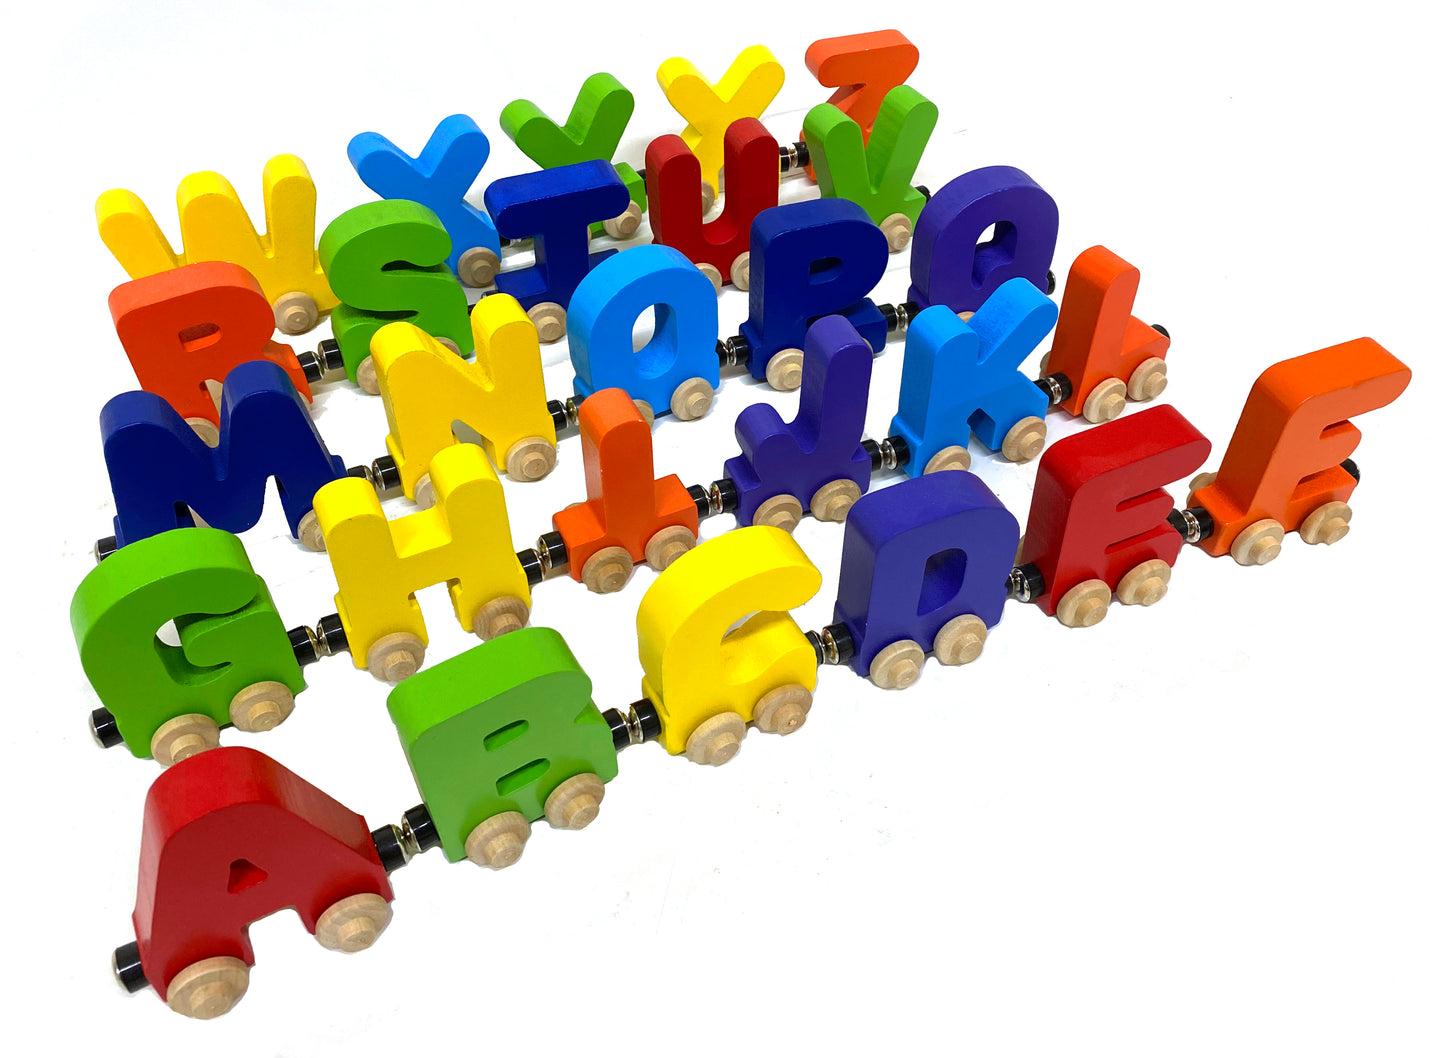 2 Letter Train Wooden Perosnalized Name Letters Includes Train & Wagon Letters Puzzle Includes Train & Wagon Free